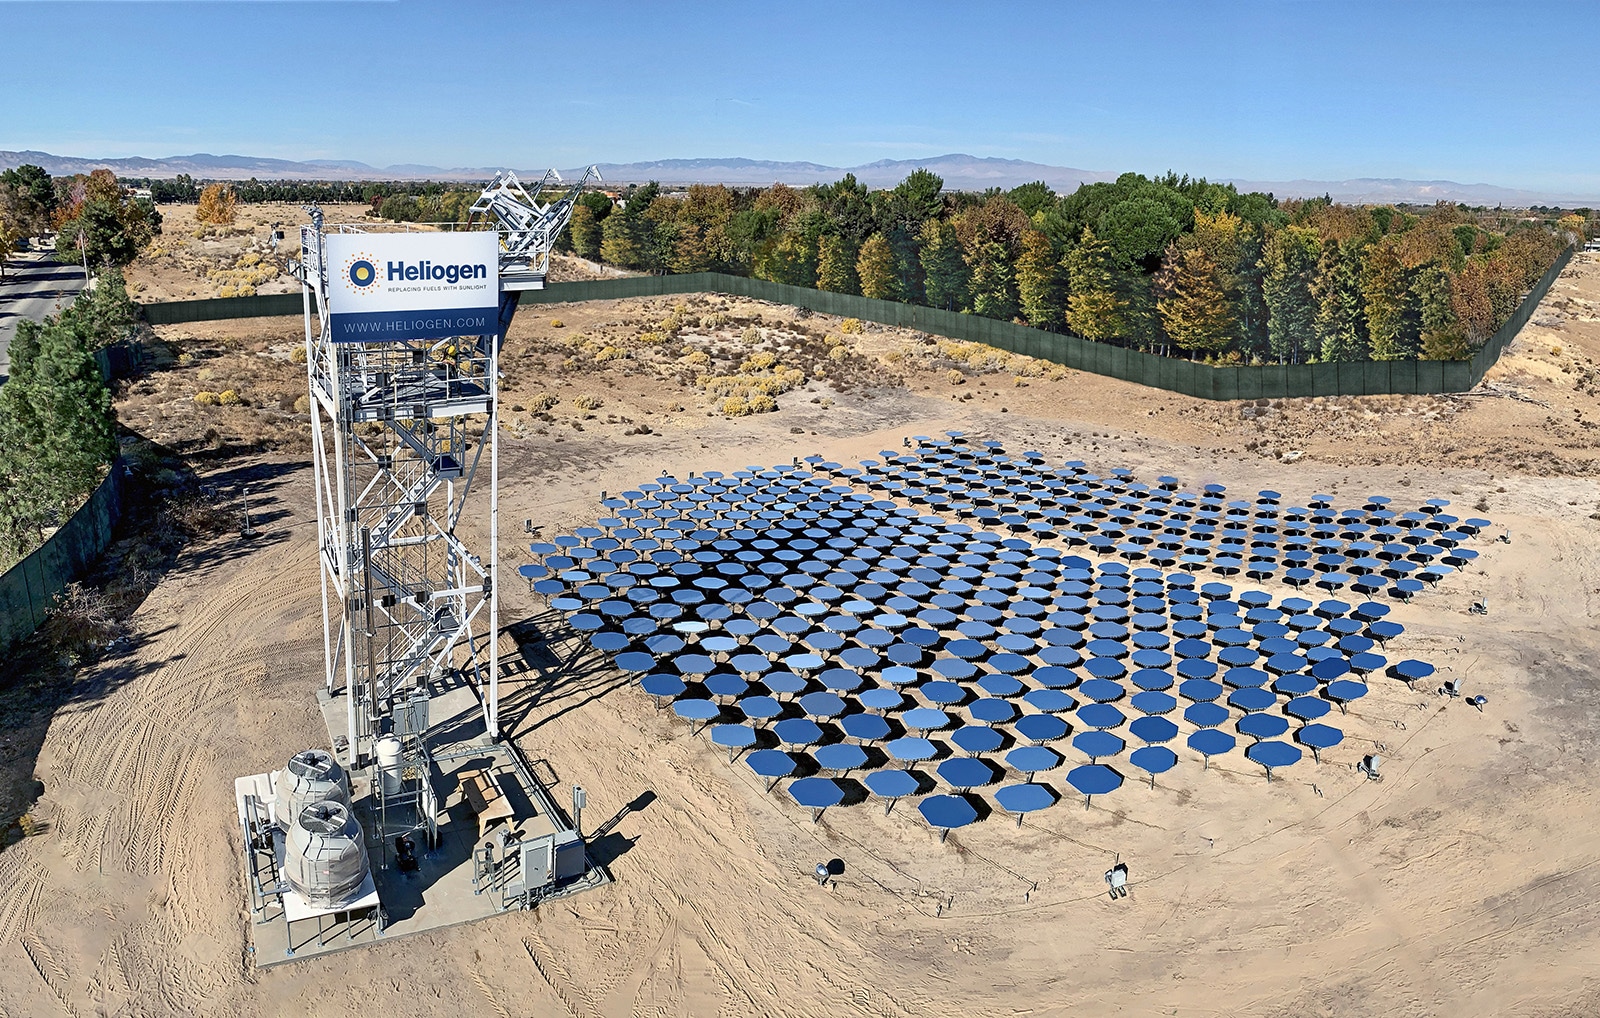 Hundreds of computer-controlled mirrors next to a solar tower in an industrial facility